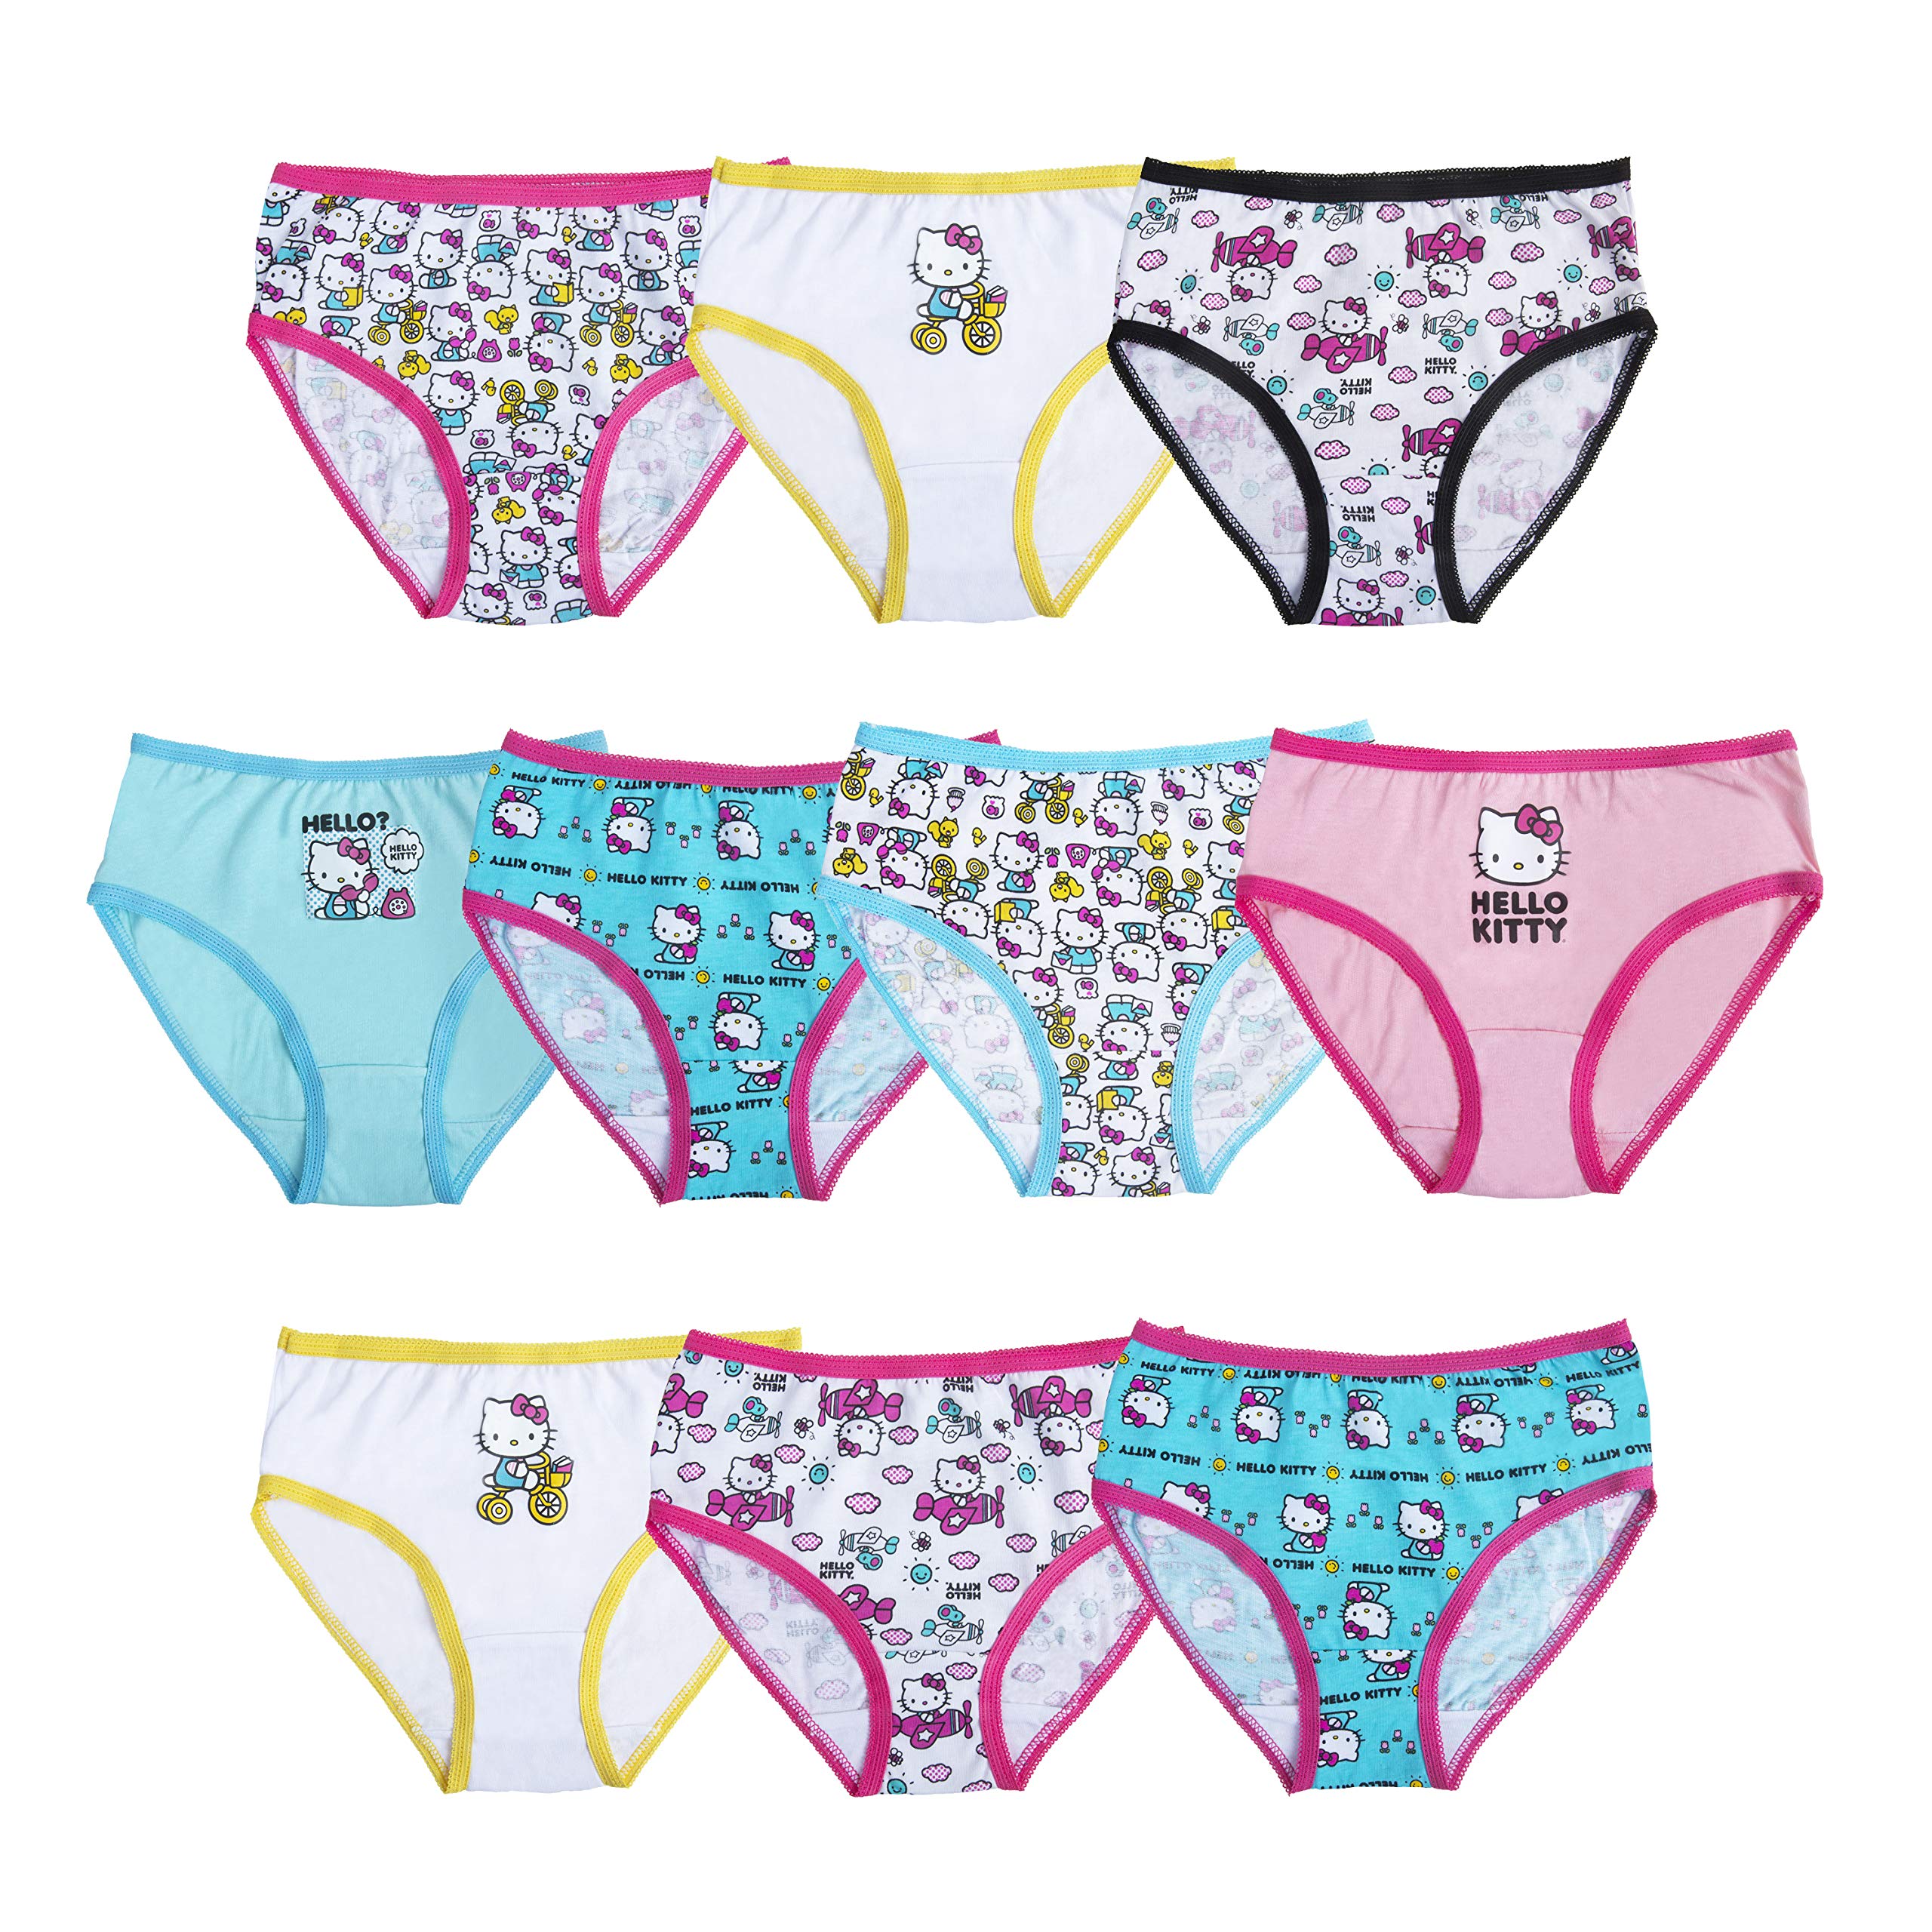 Hello Kitty Girls' 100% Combed Cotton Underwear 7pk and 10pk Panties in 2/3t, 4t, 4, 6 and 8